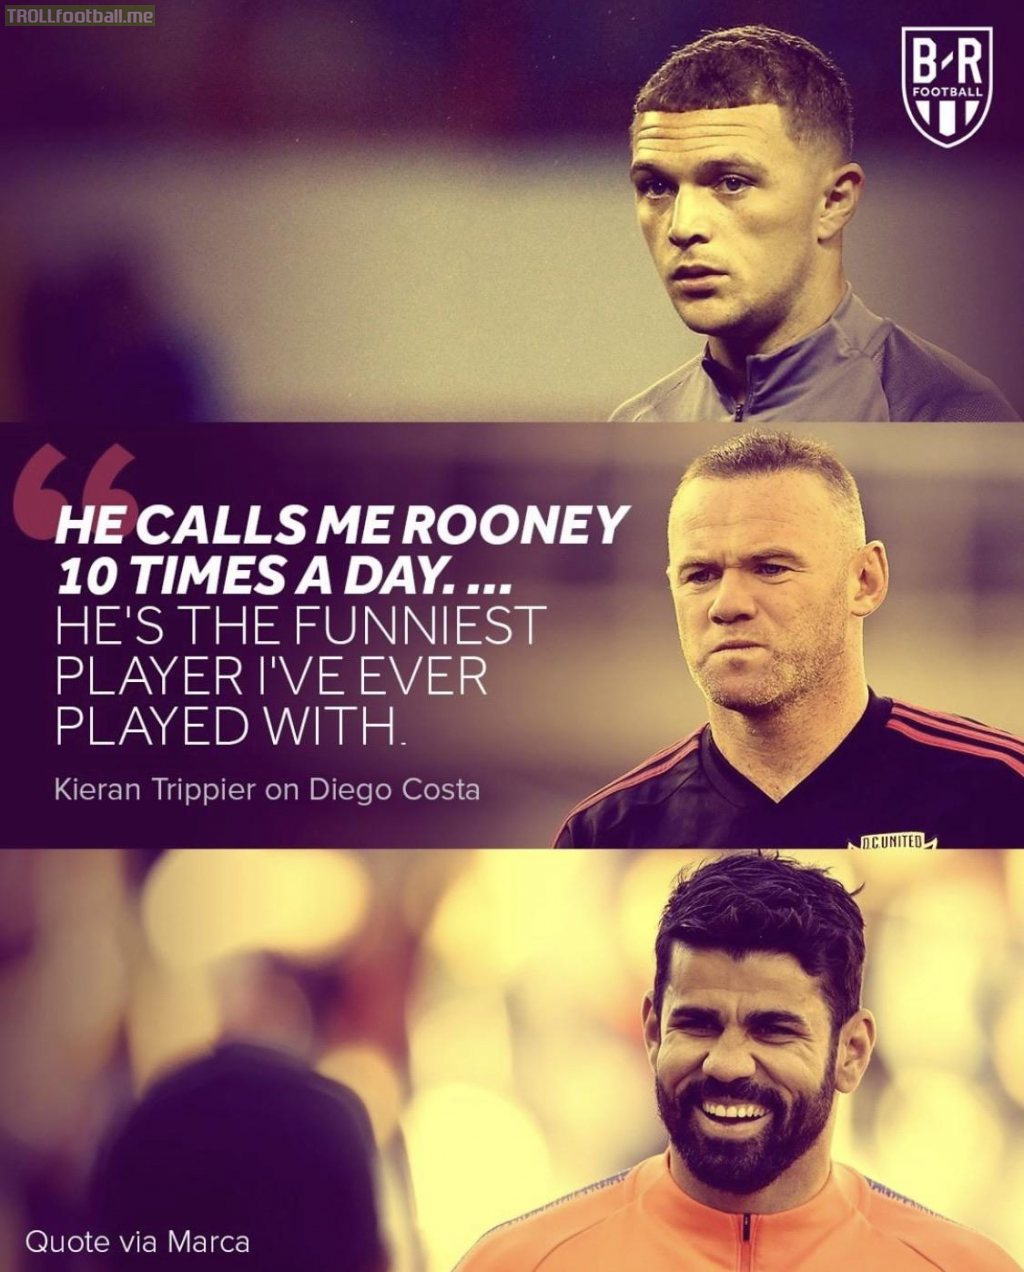 Kieran Trippier on Diego Costa: "He calls me Rooney 10 times a day"